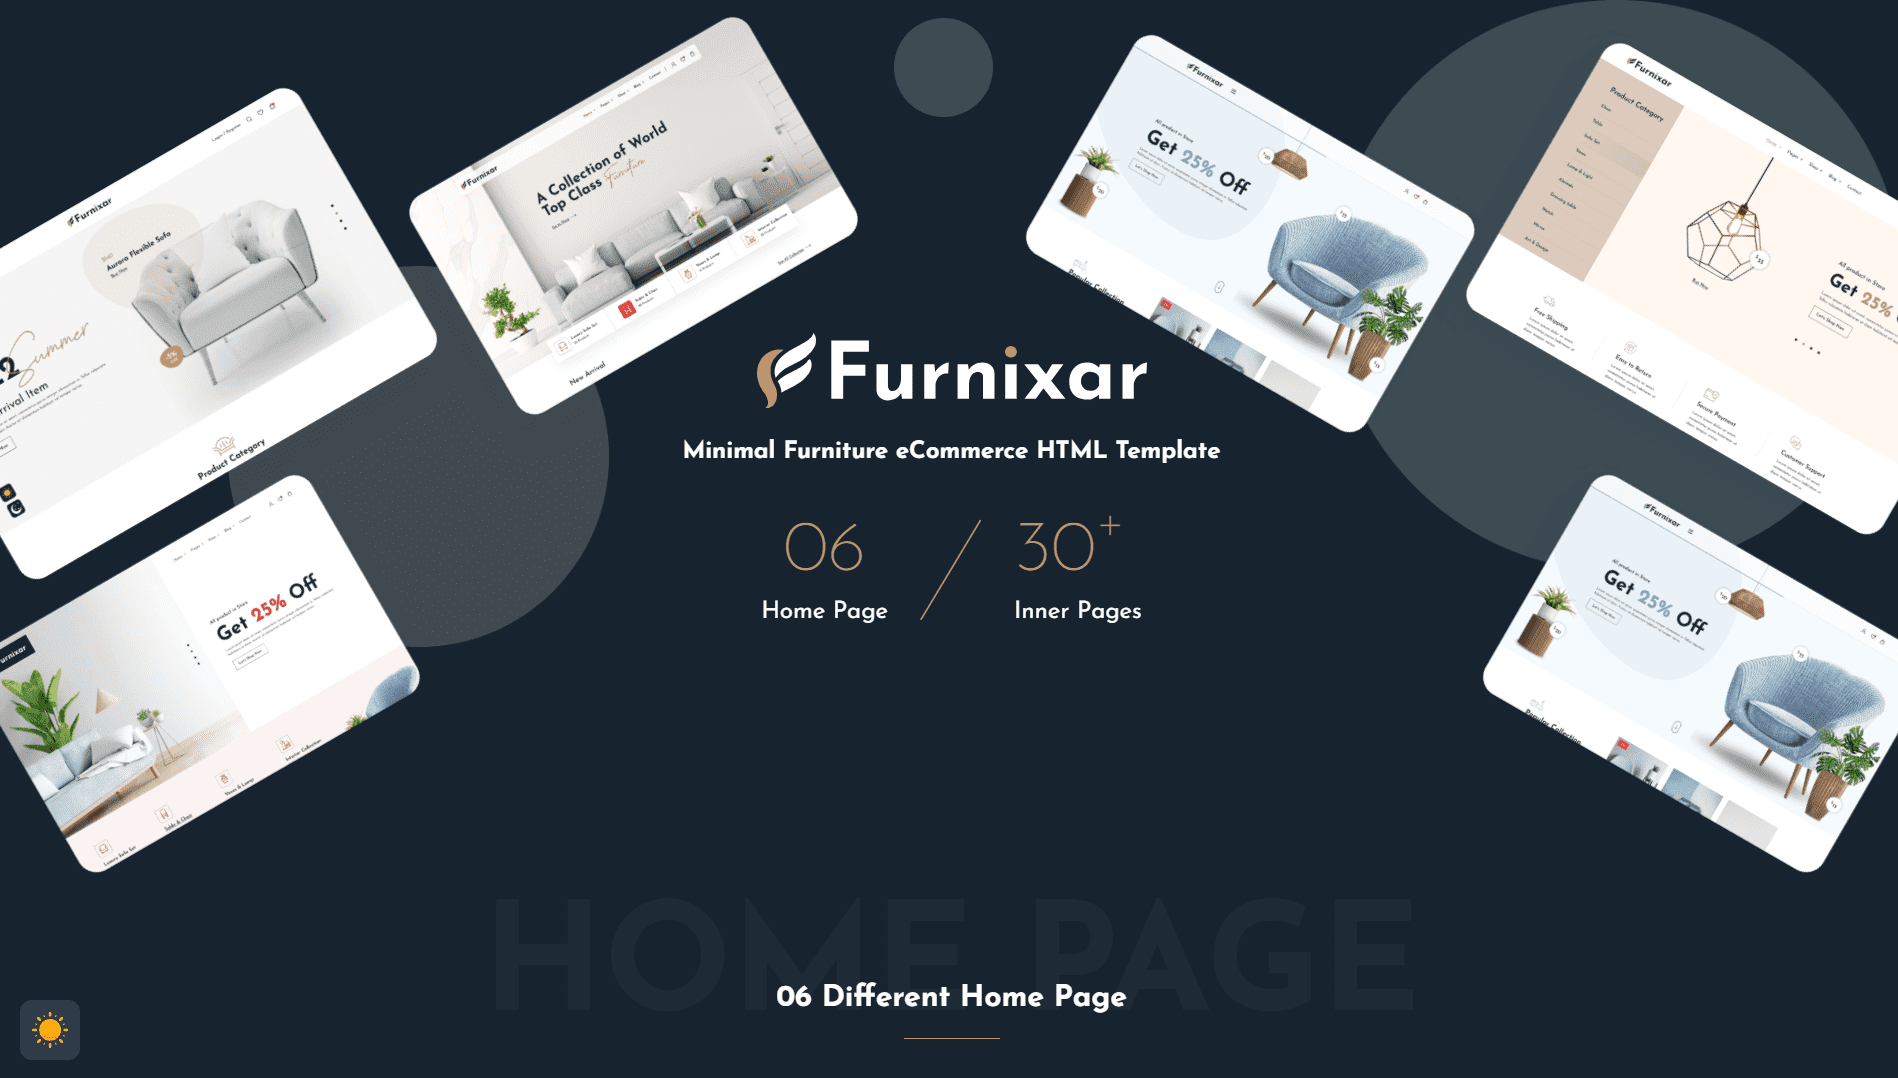 Furnixar- Multipurpose eCommerce HTML Template for a Furniture store and Interior design business